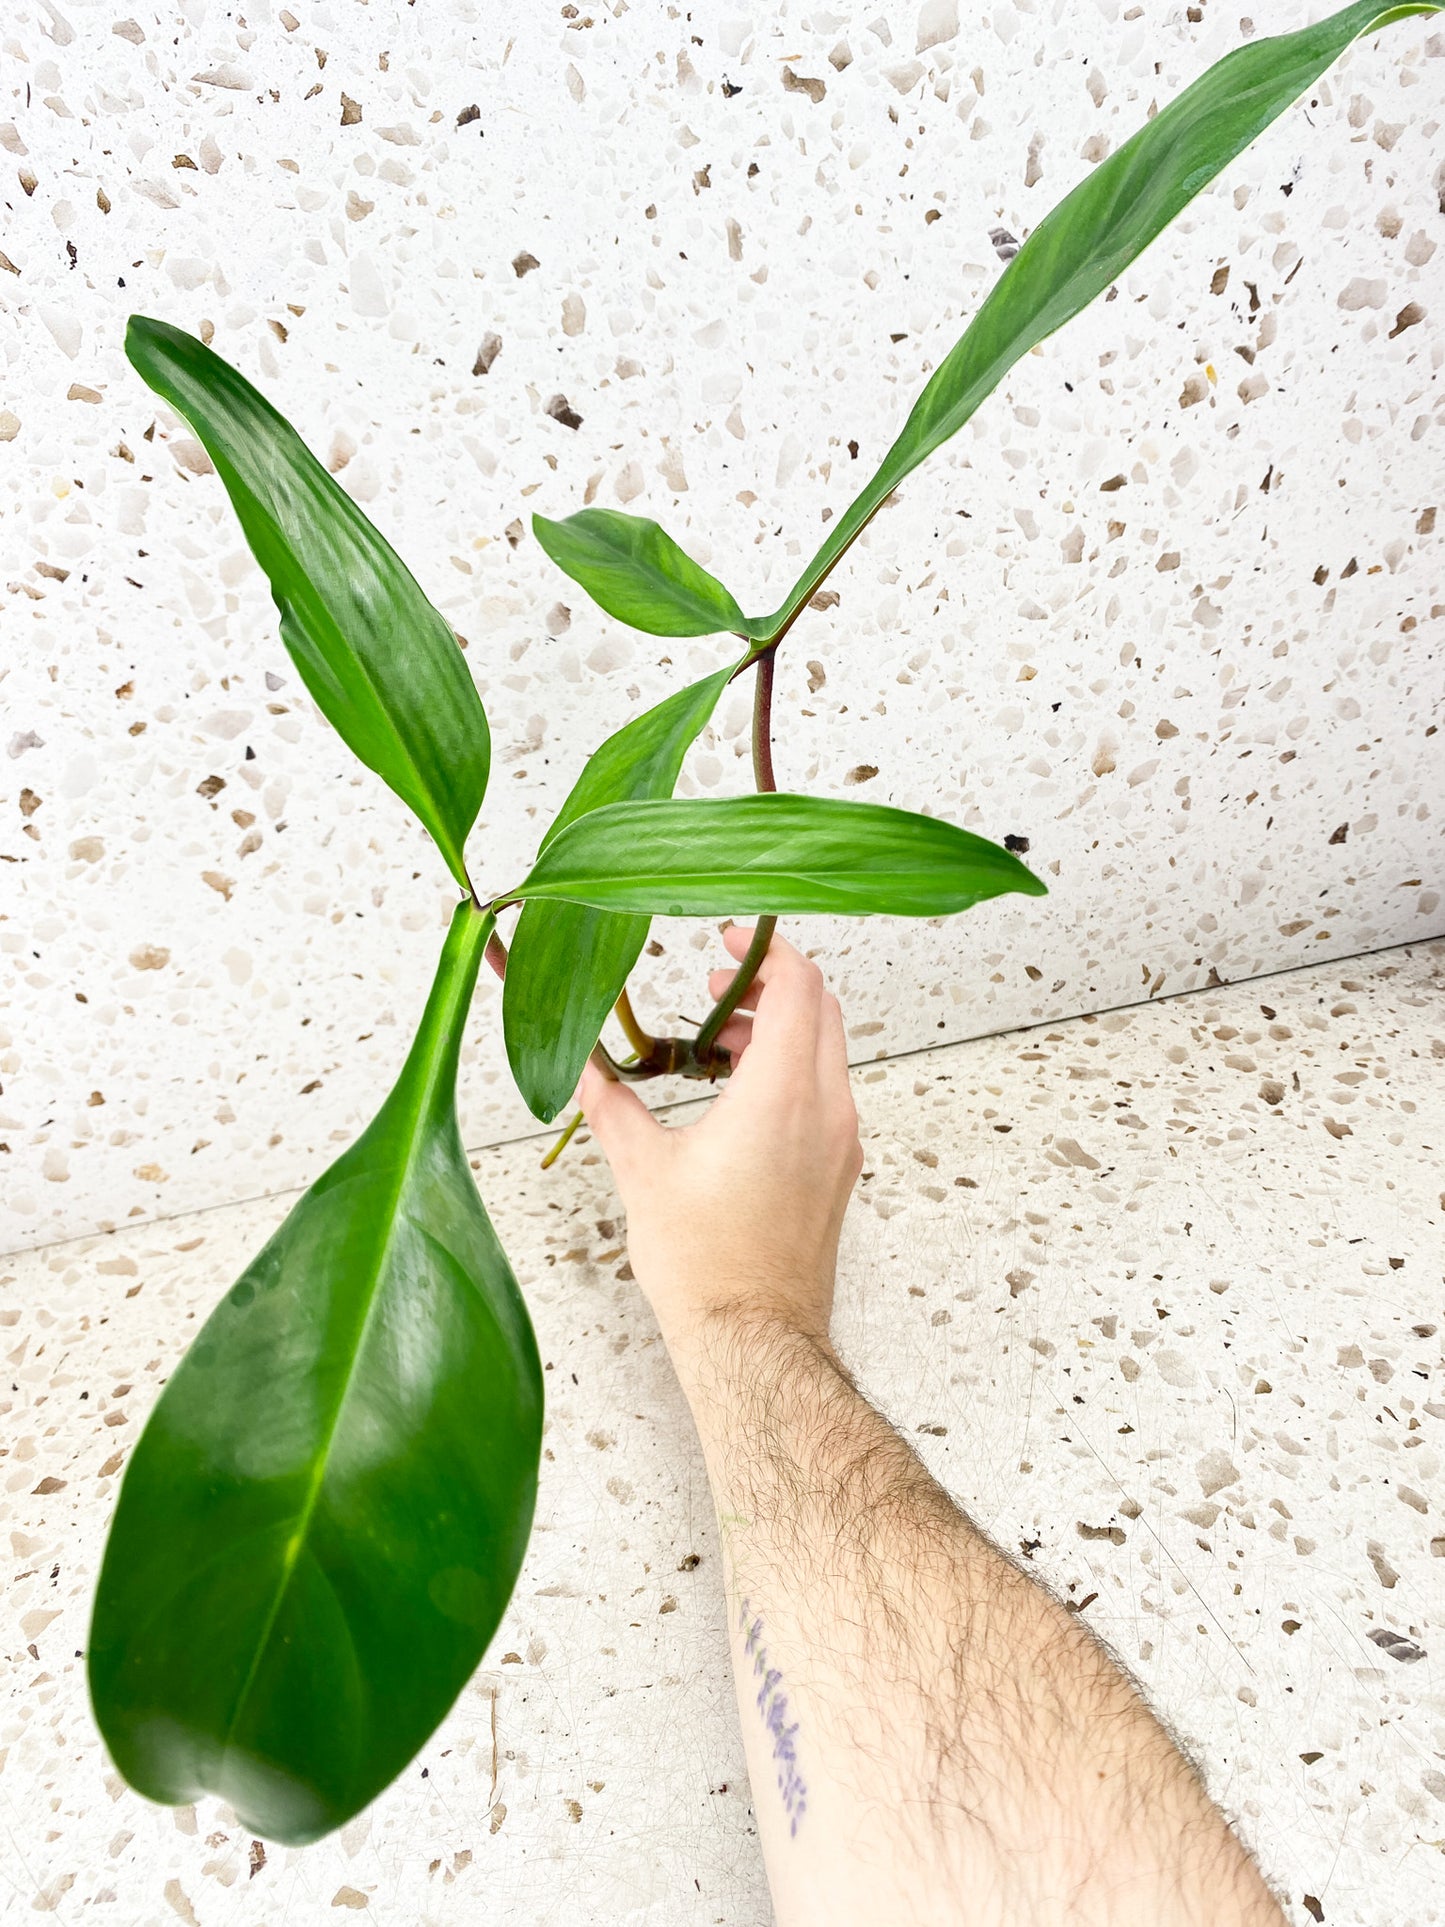 Philodendron 69686 2 leaves 1 shoot top cutting (rooting in water)